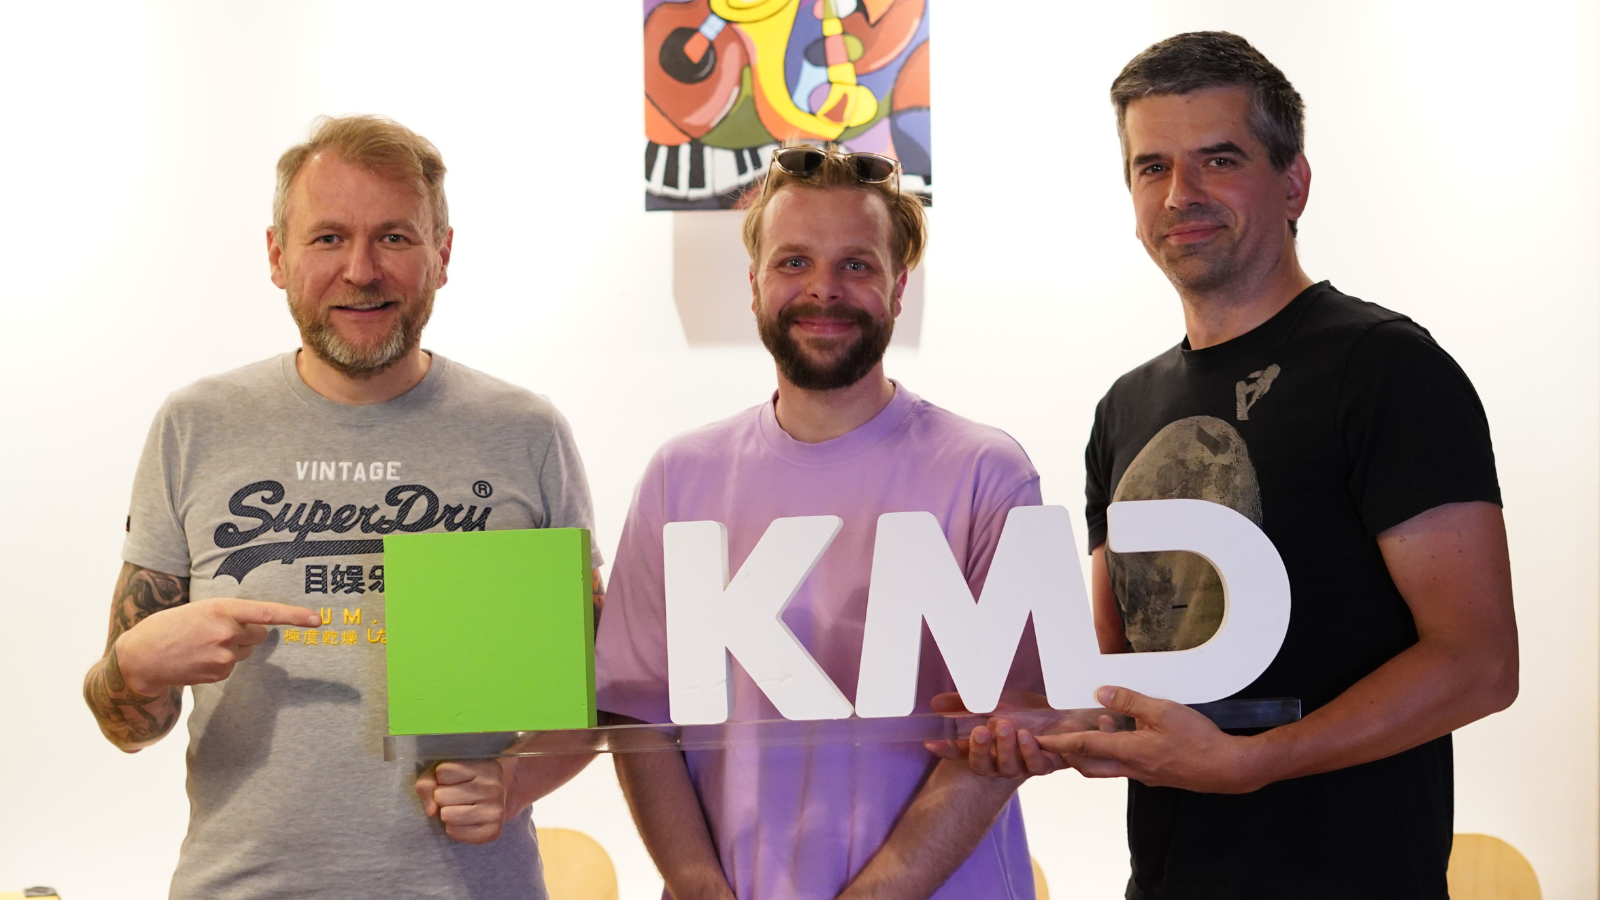 Three managers of KMD Elements team holding KMD sign